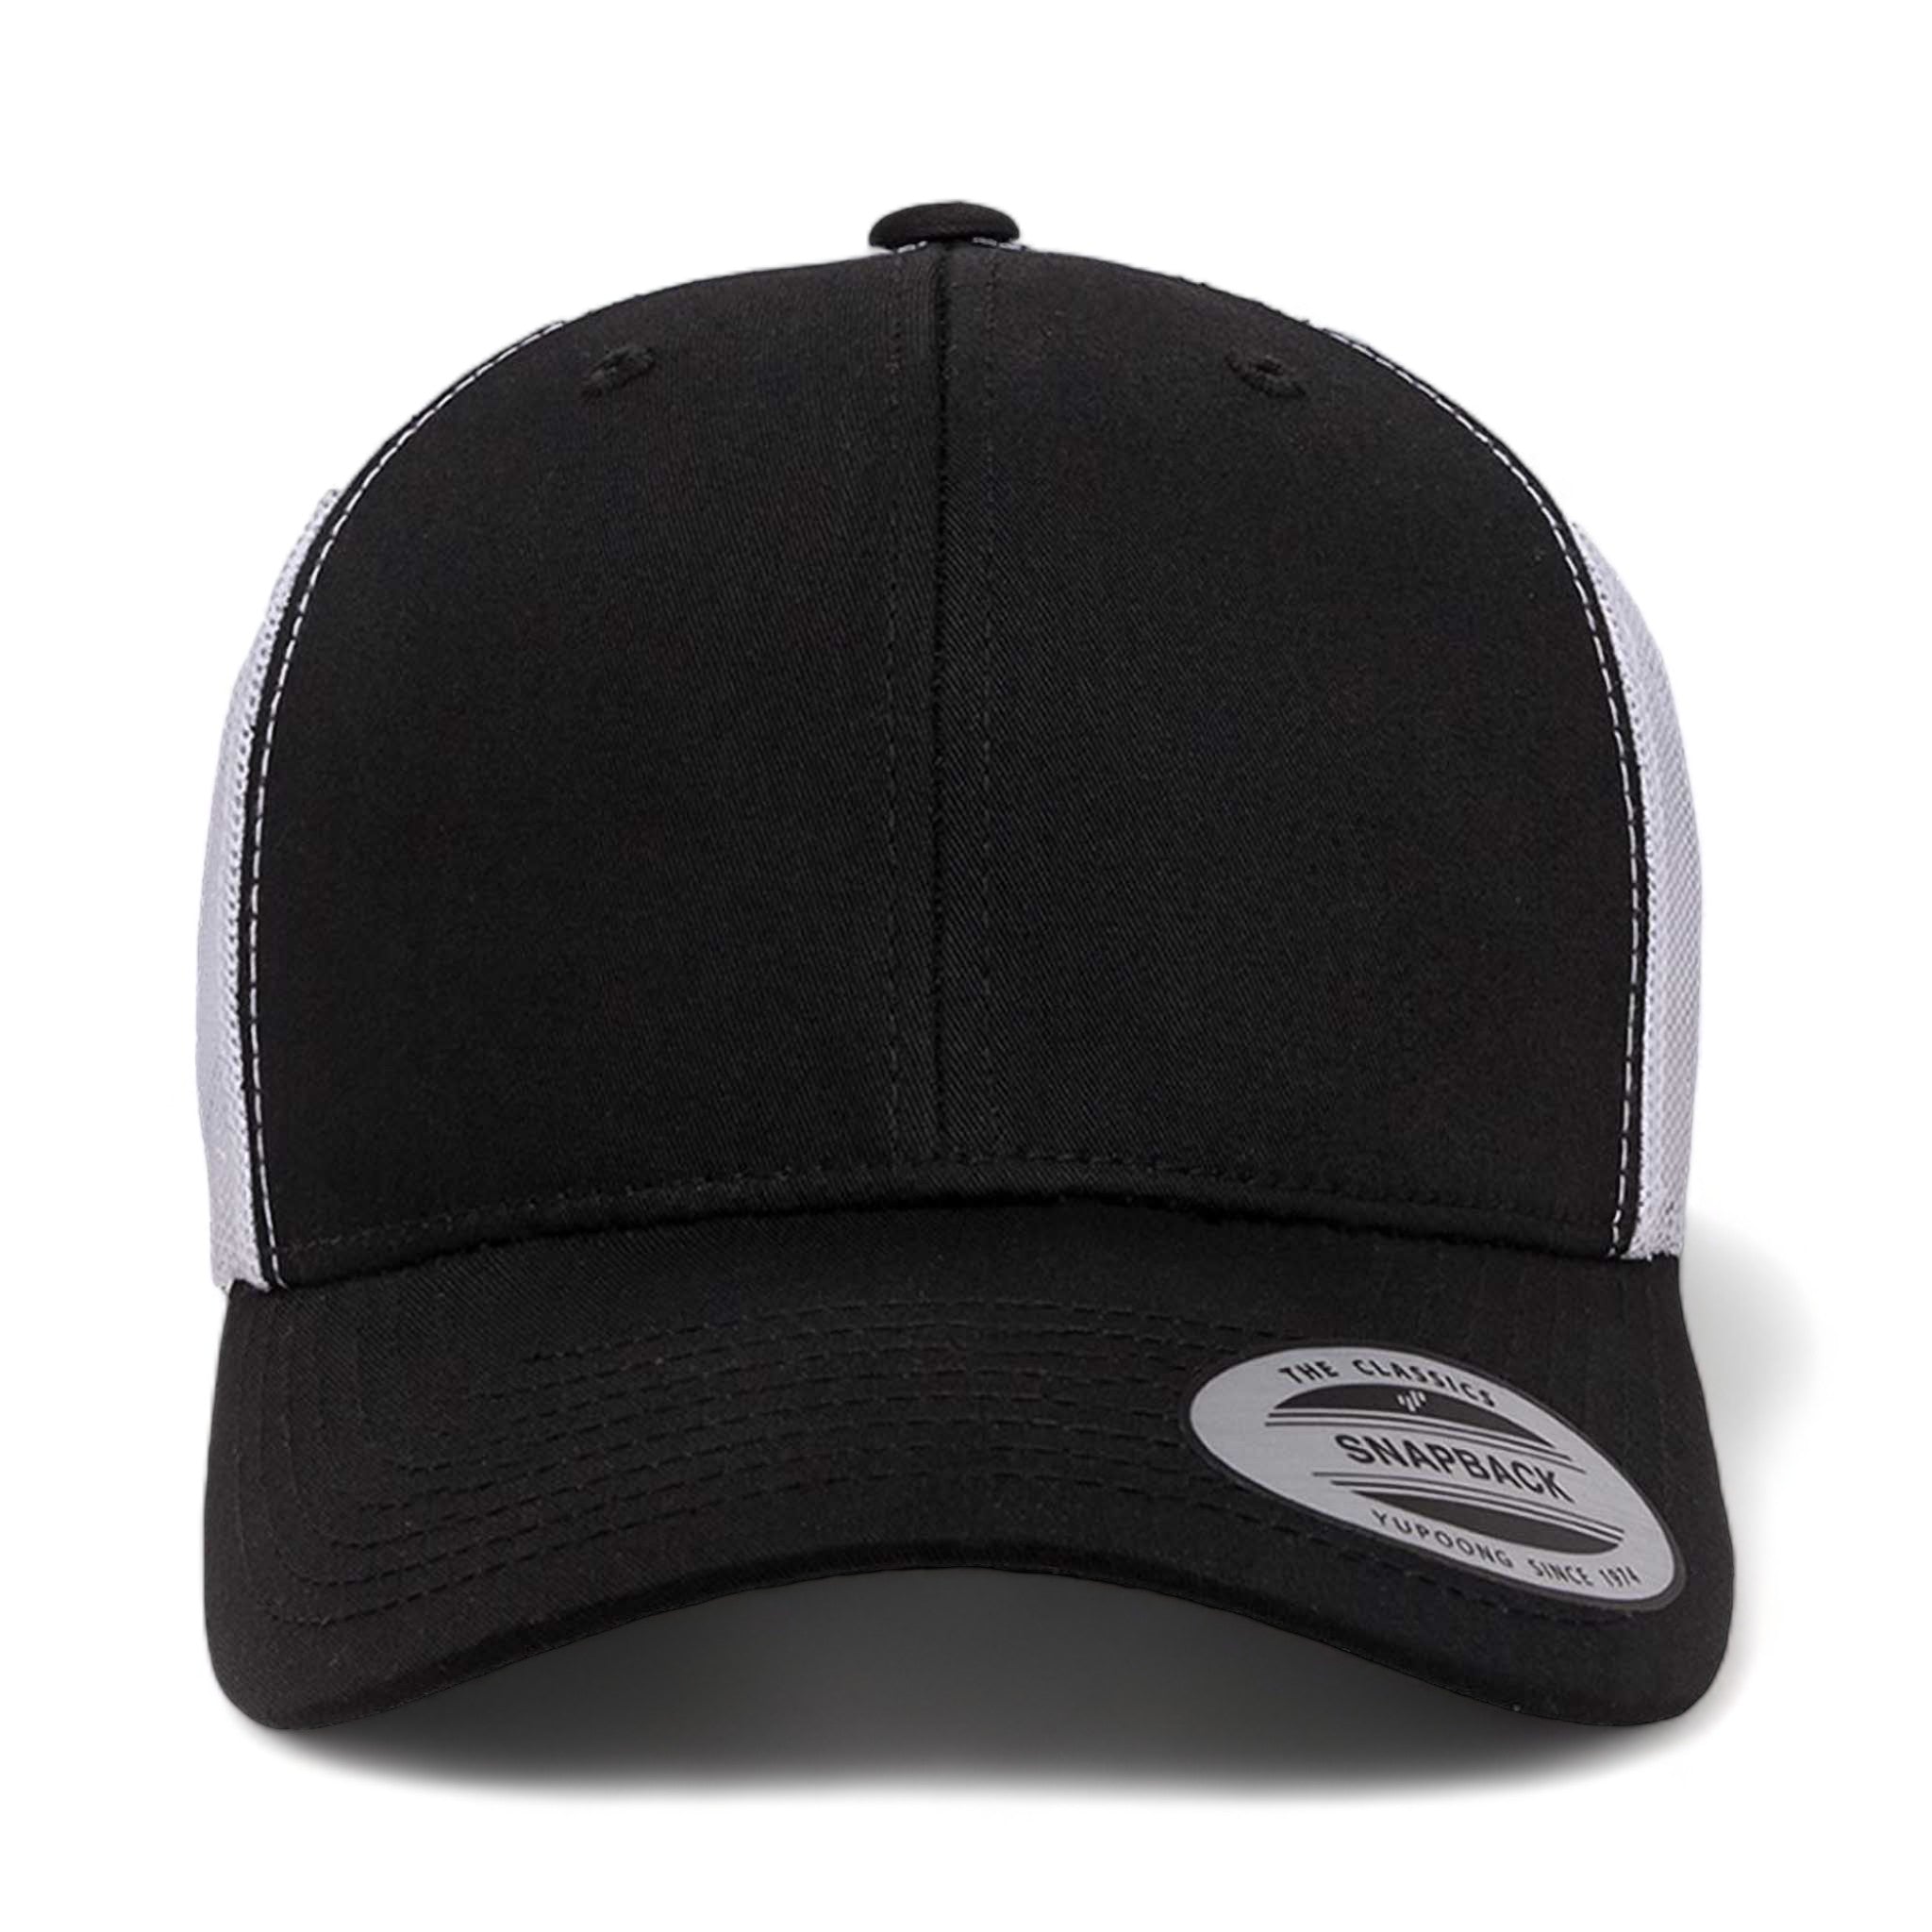 Front view of YP Classics 6606 custom hat in black and white